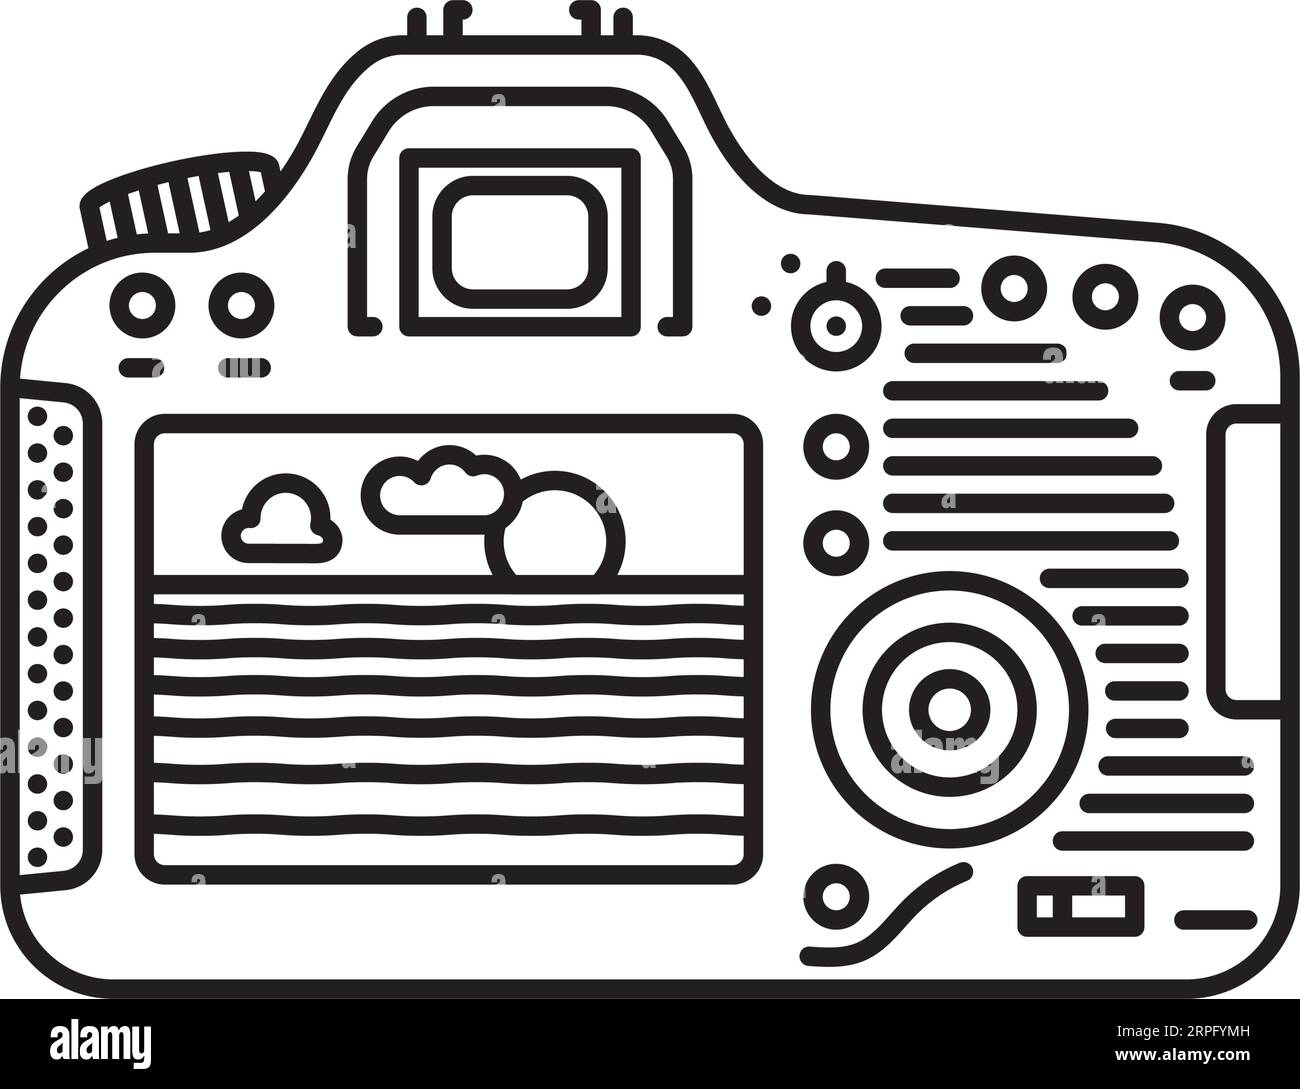 Rear view of DSLR camera with sunset in digital viewfinder vector line icon for World Nature Photography Day on June 15 Stock Vector